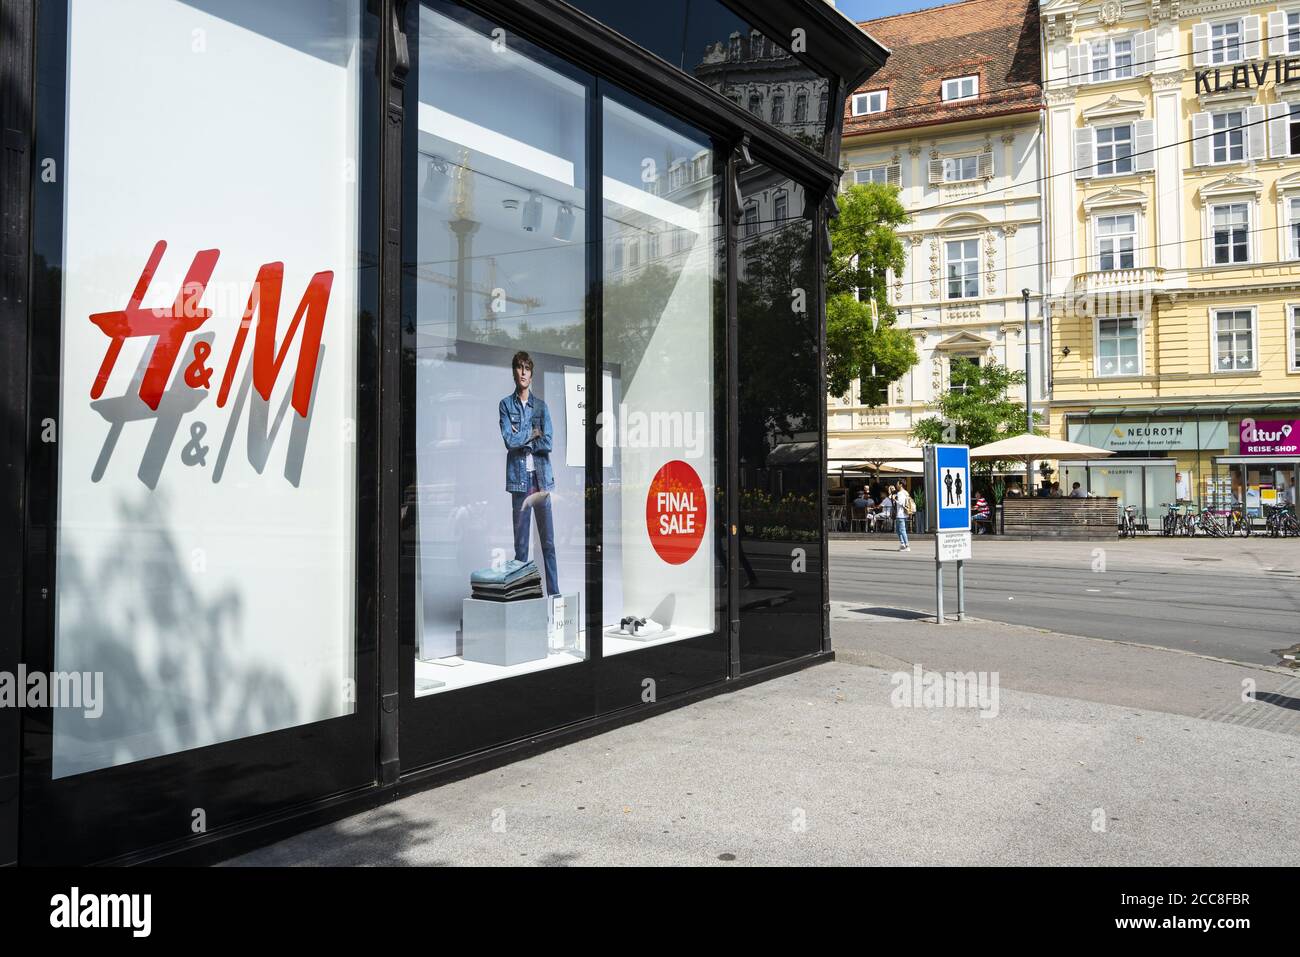 Graz Shop High Resolution Stock Photography and Images - Alamy